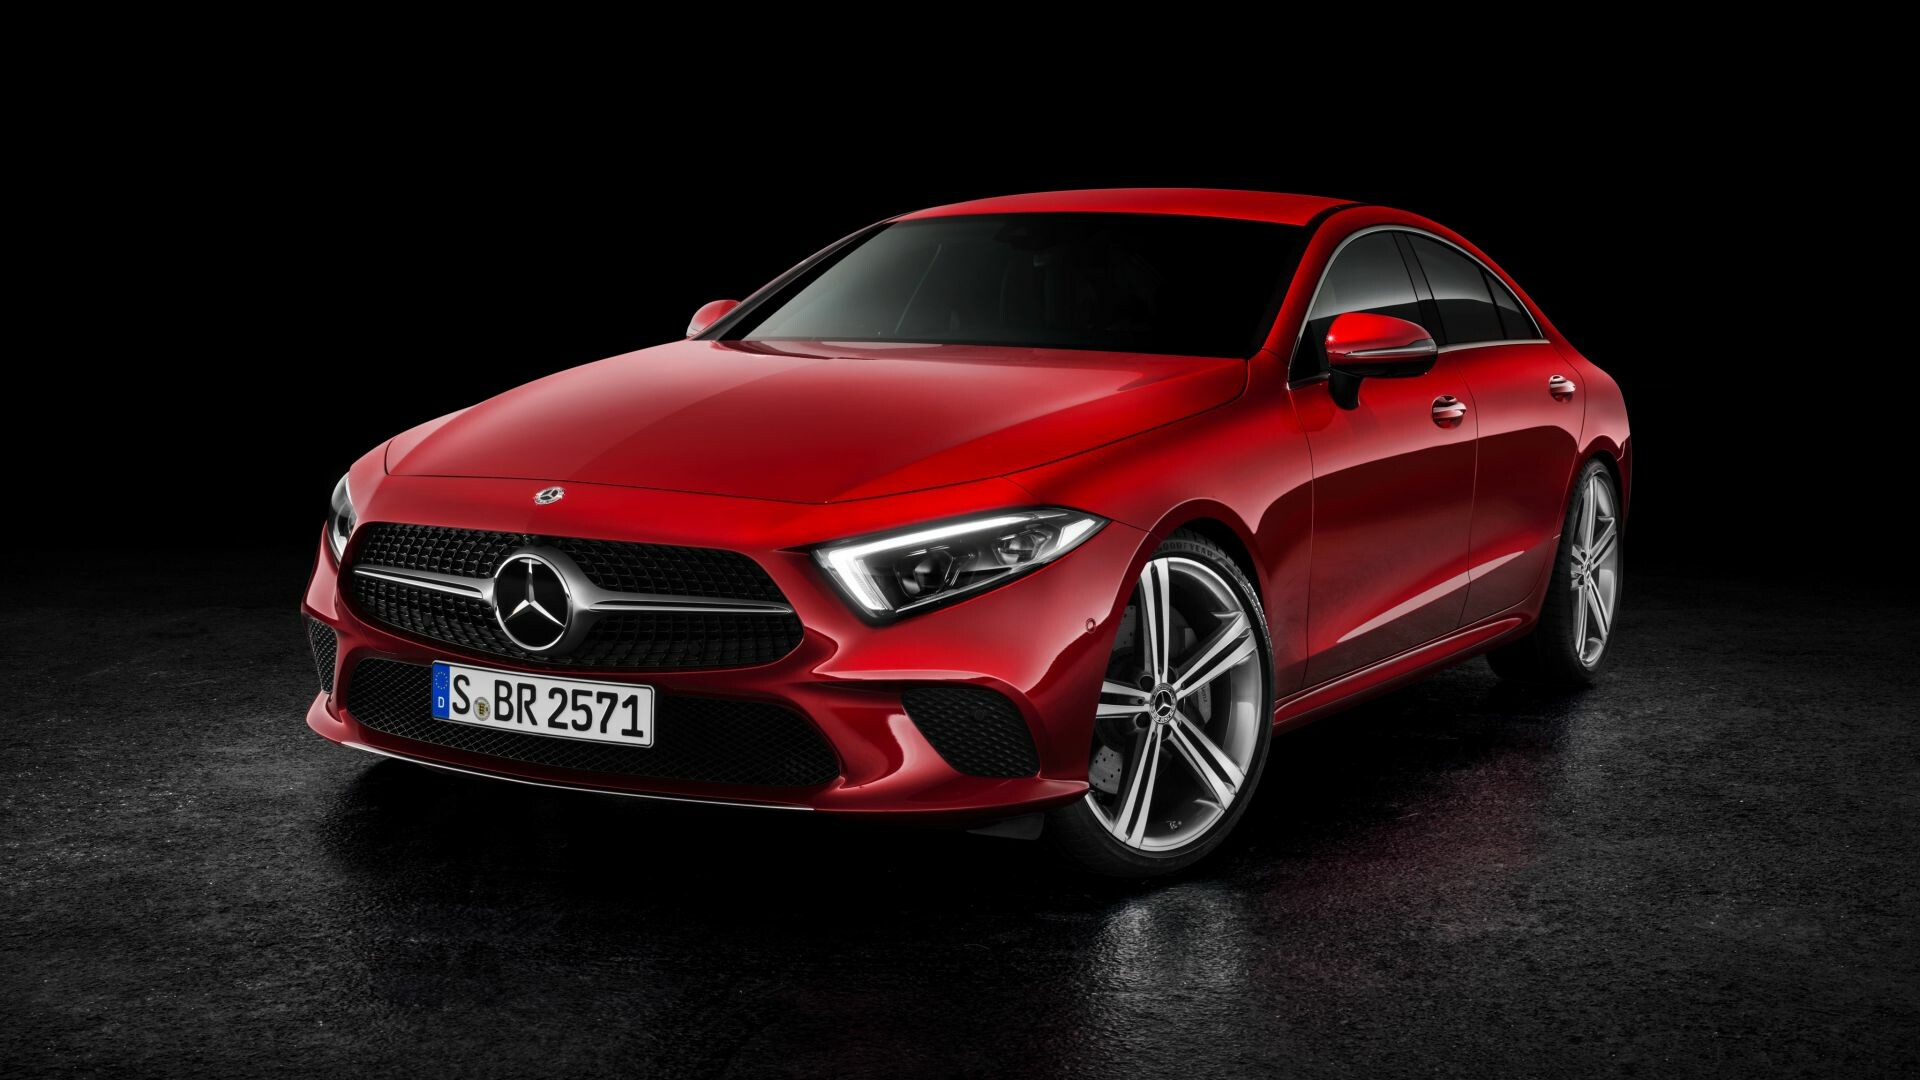 Mercedes-Benz: CLS 450, 2018 car, Mid-size luxury 4-Door Coupe. 1920x1080 Full HD Background.